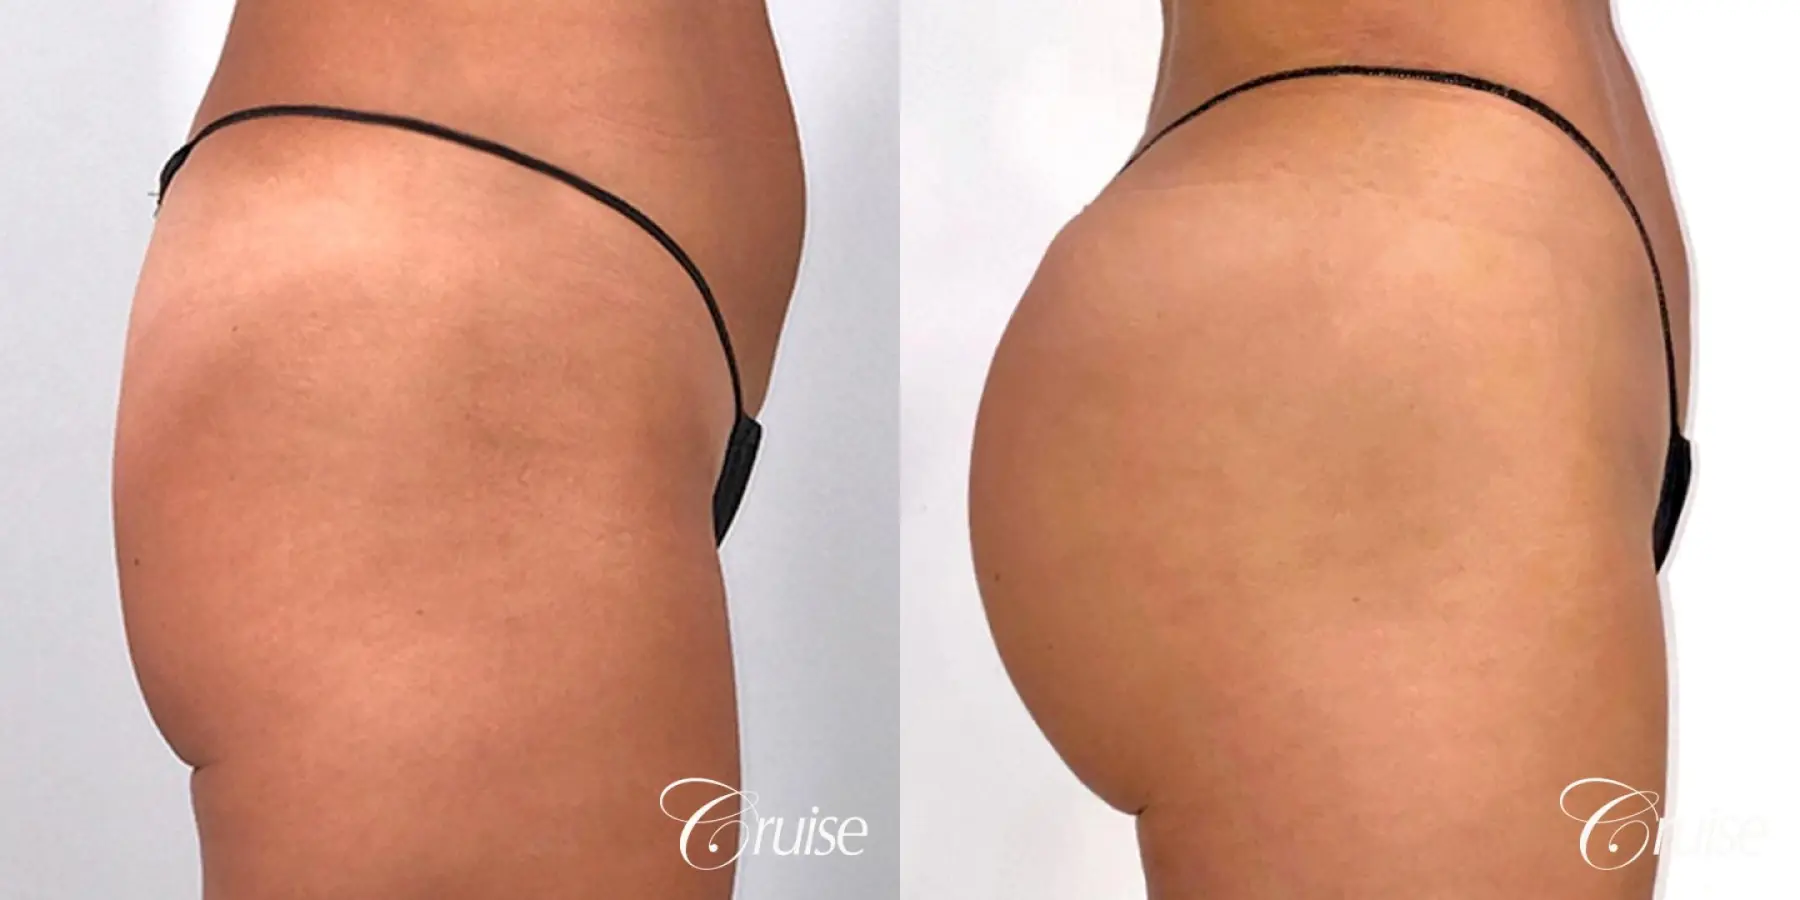 Brazilian Butt Lift with Liposuction to Stomach & Flanks - Before and After 6